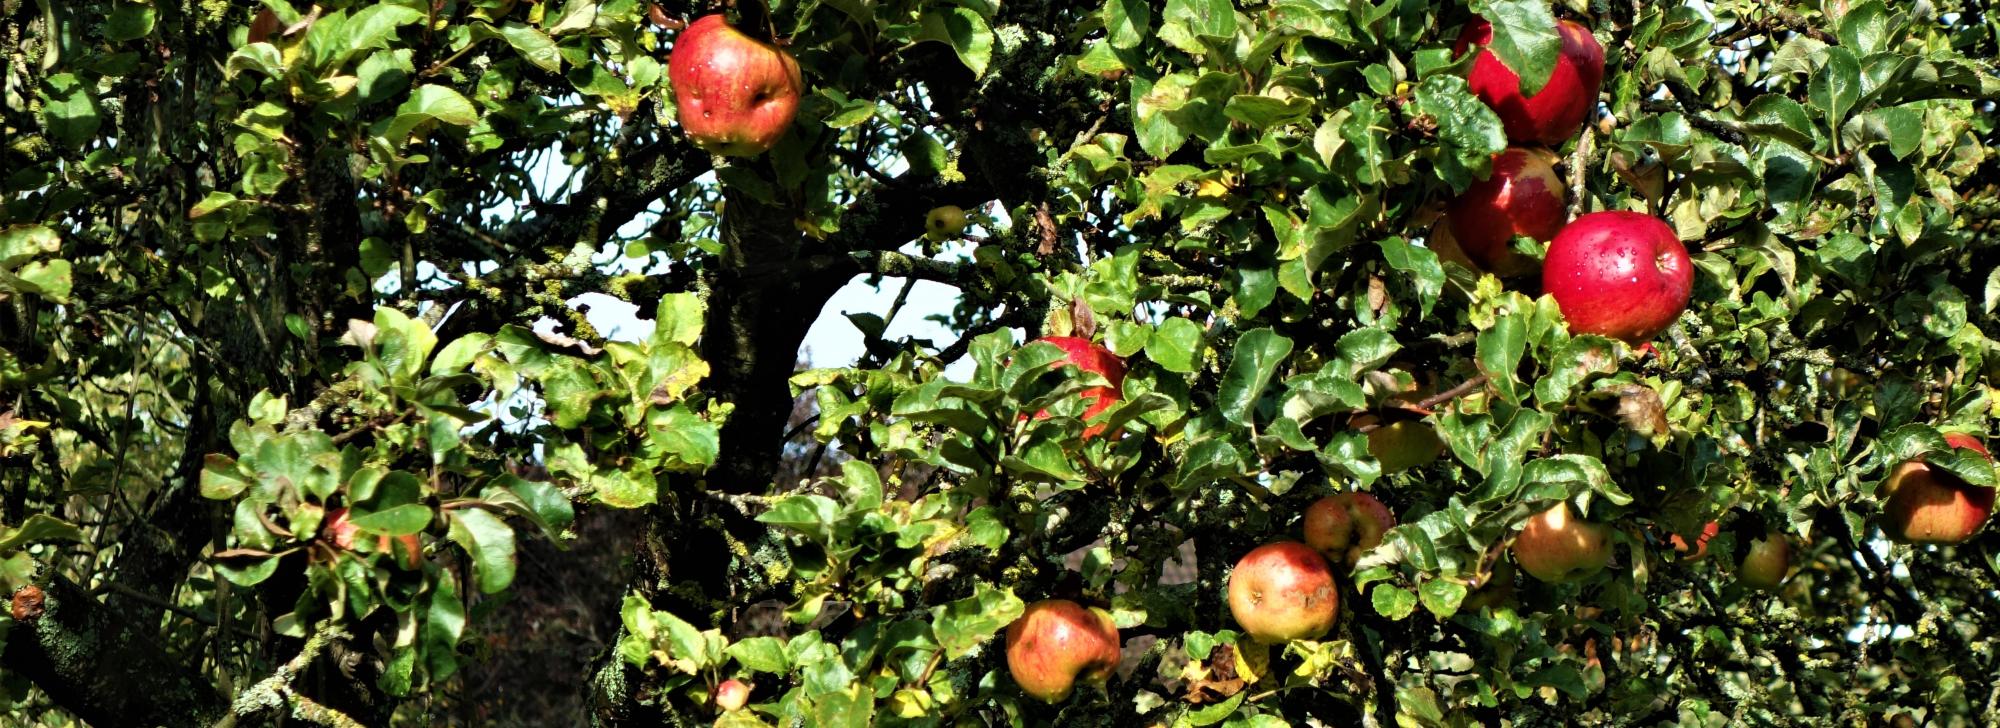 Cotswold apples in the garden of Pauline Willis' house